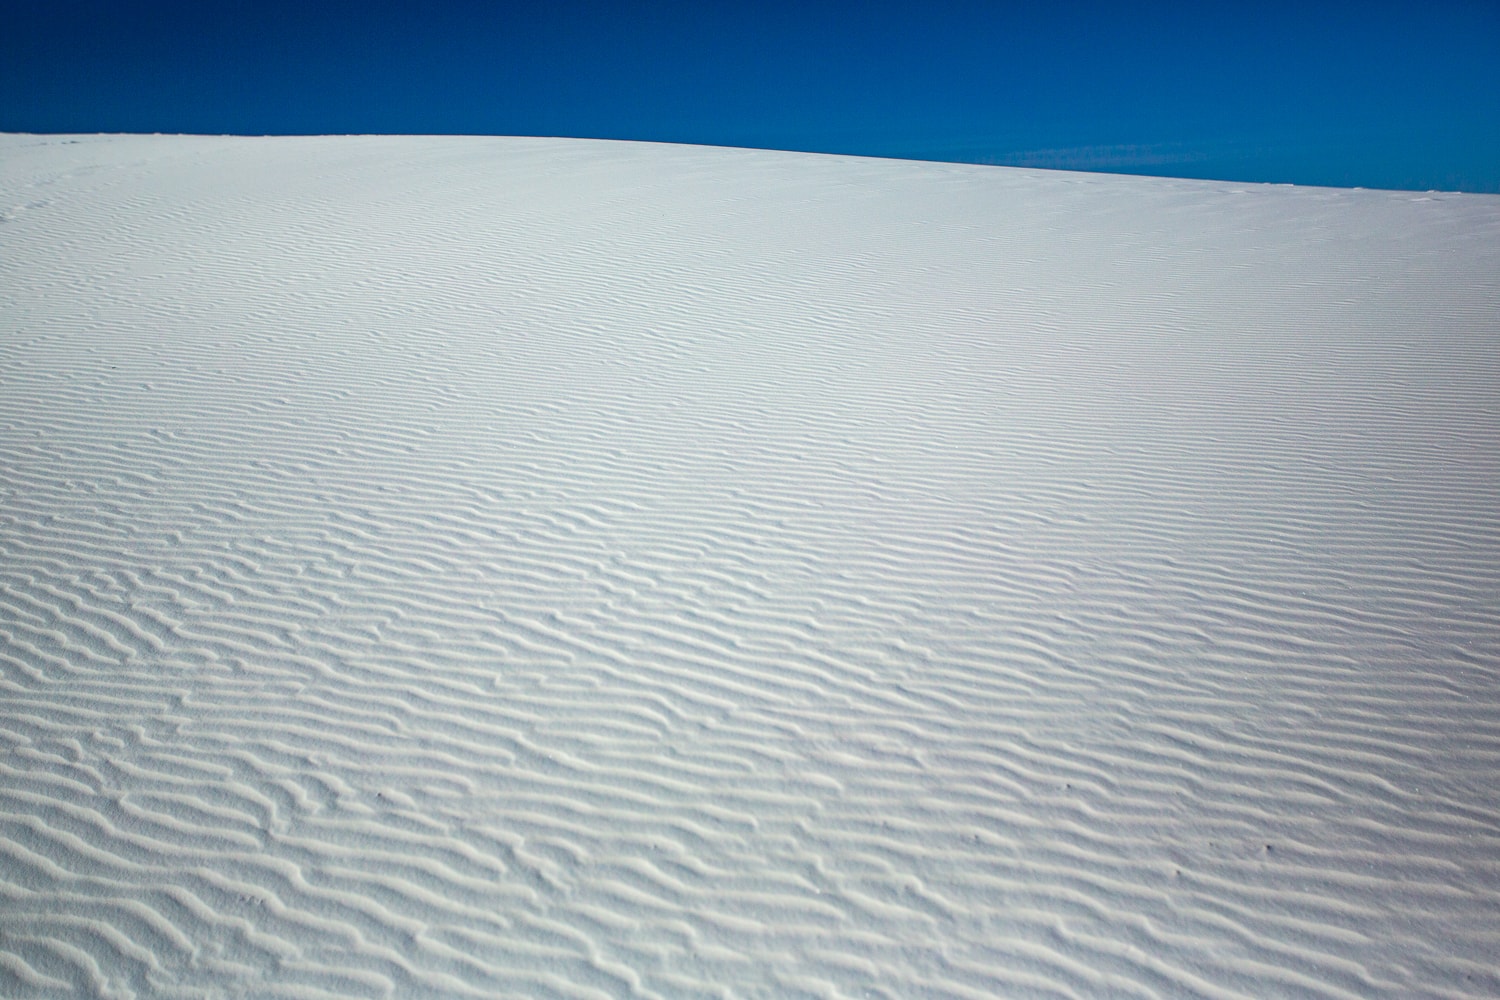 A view of a white sand dune against a blue sky backdrop at White Sands National Monument park.